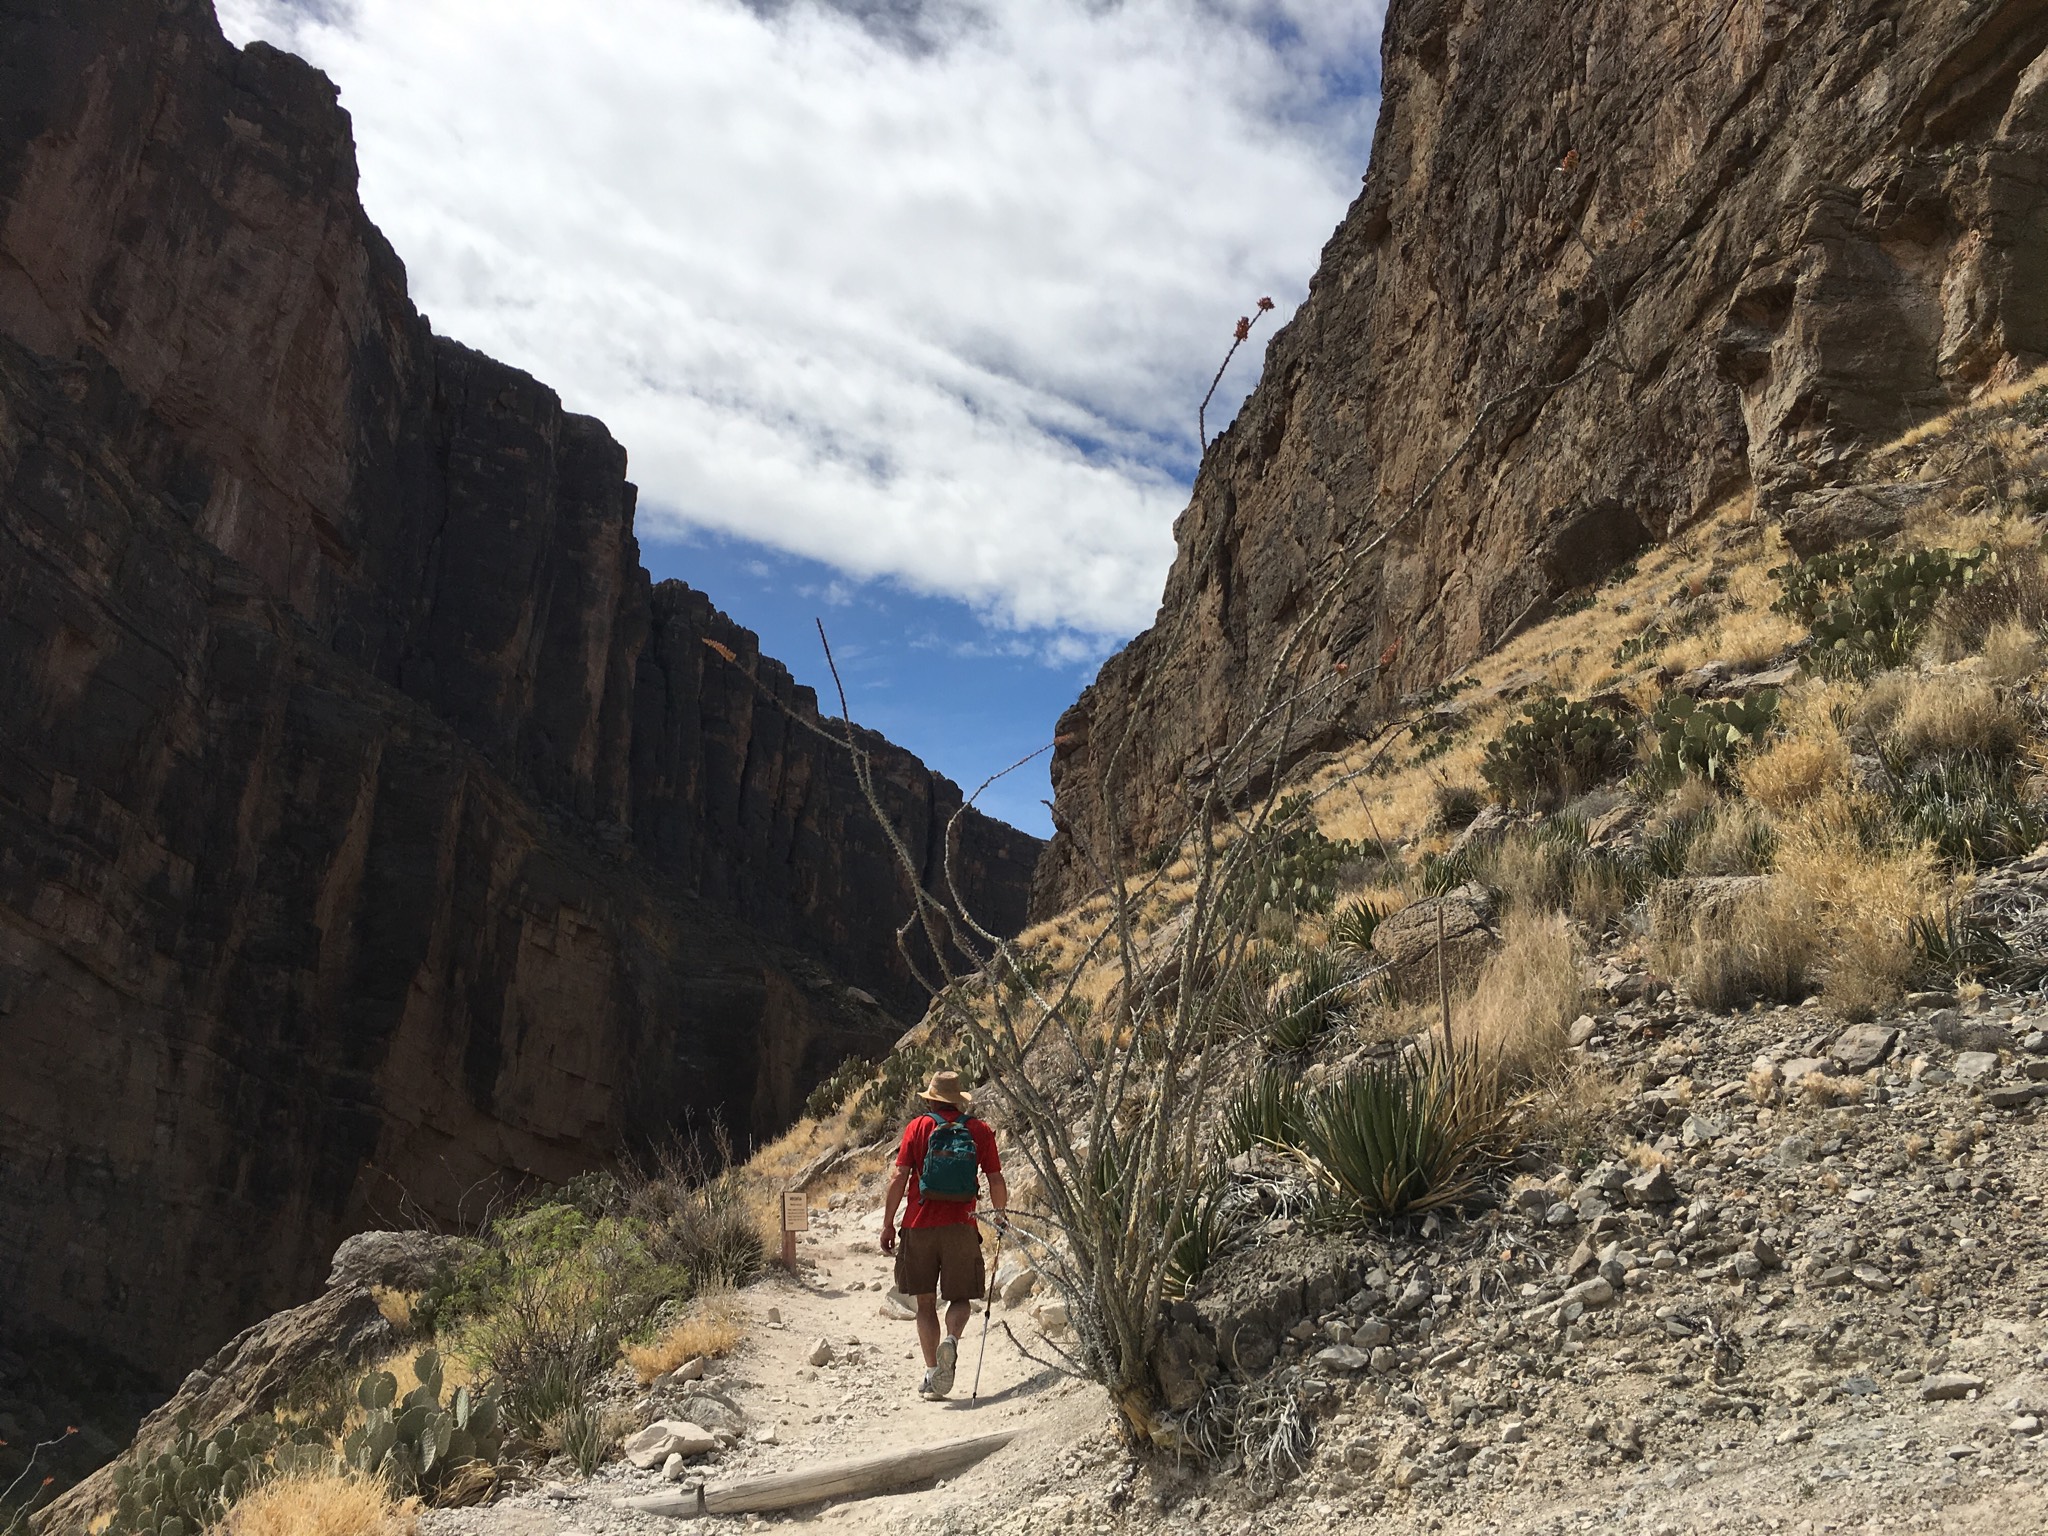  Off-road, headed up the trail to Santa Elena Canyon in Big Bend National Park. Photo by Ellen Holmes 